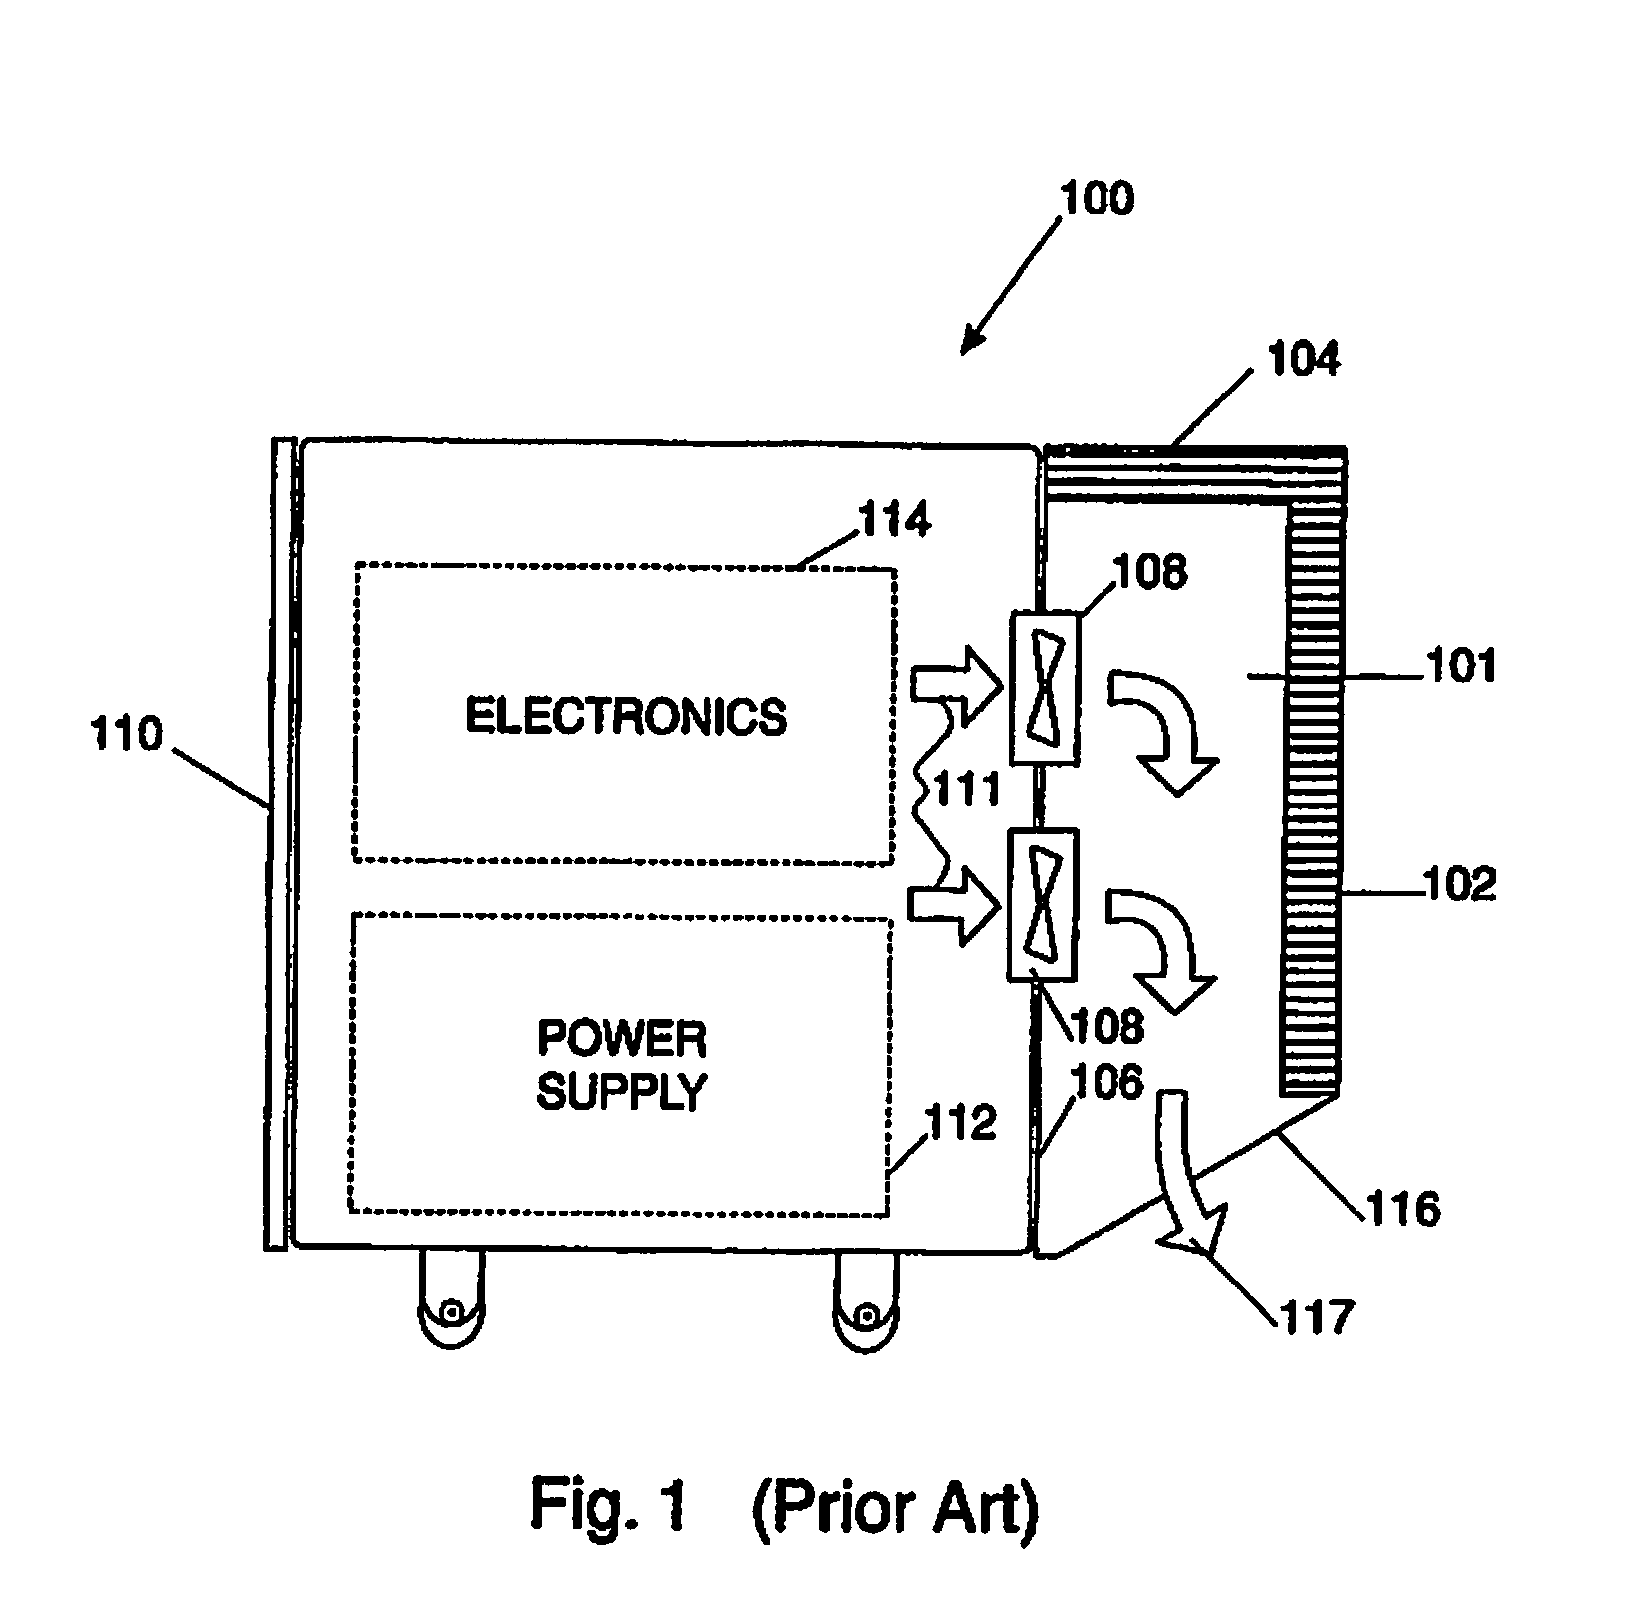 Method and Apparatus for Acoustic Noise Reduction in a Computer System Having a Vented Cover